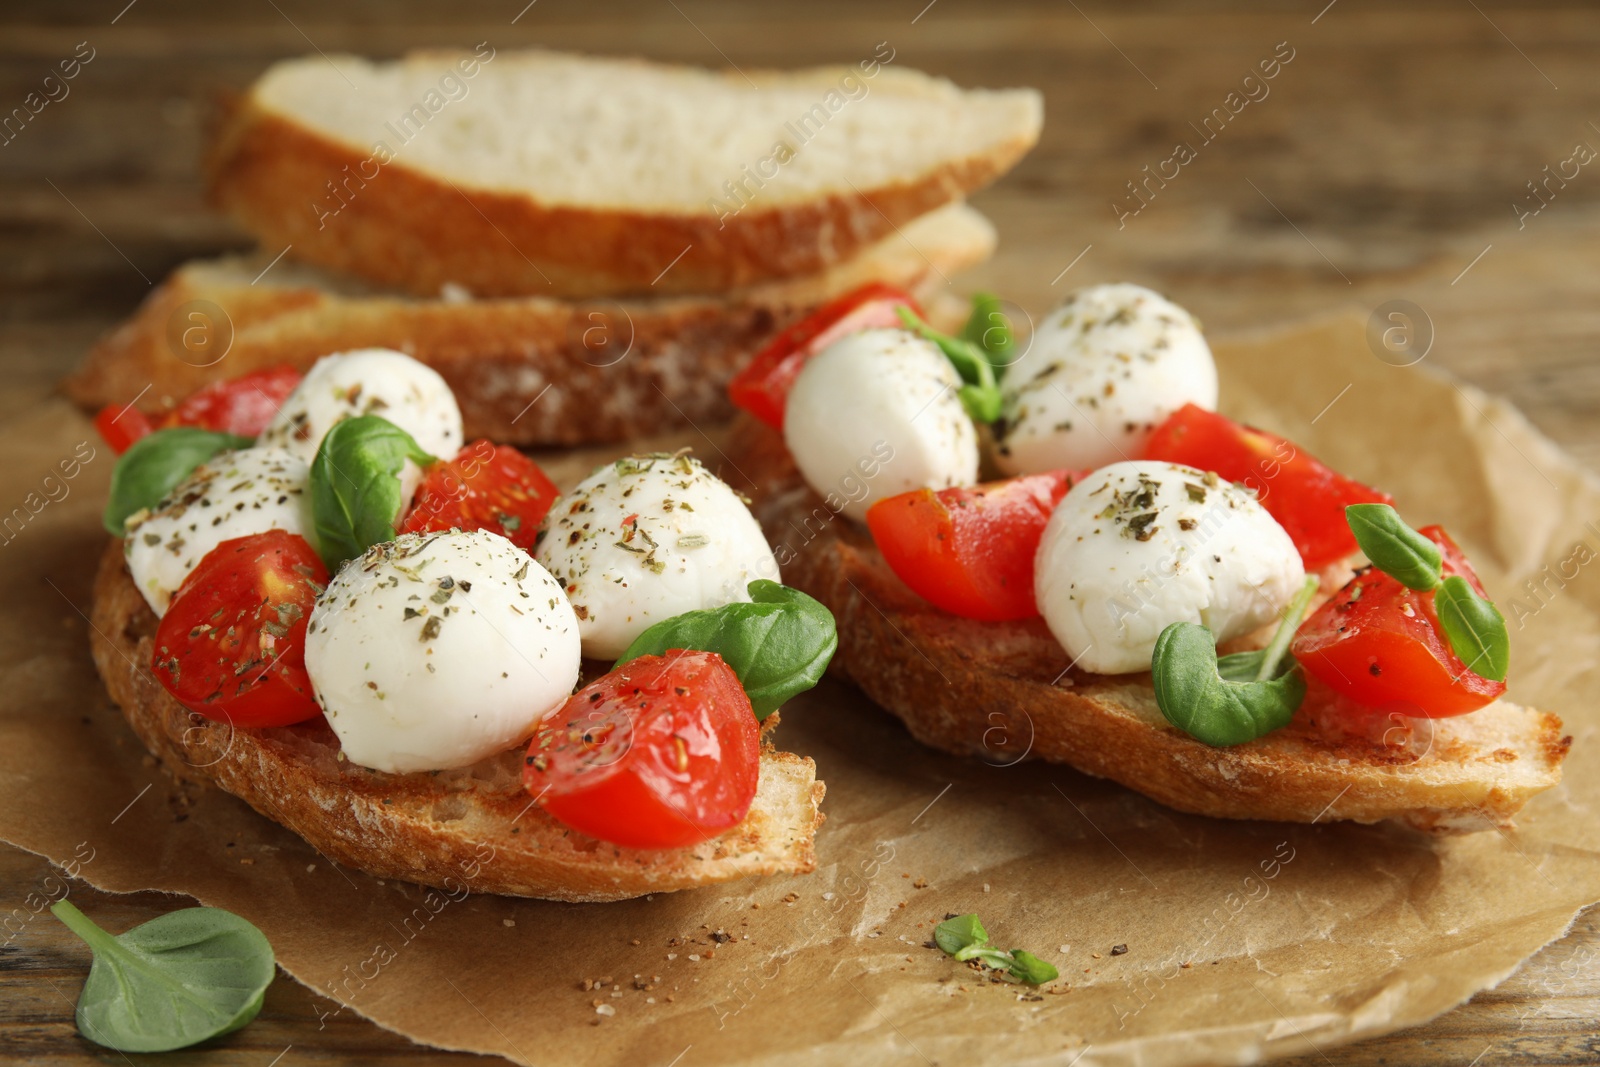 Photo of Delicious sandwiches with mozzarella, fresh tomatoes and basil on wooden table